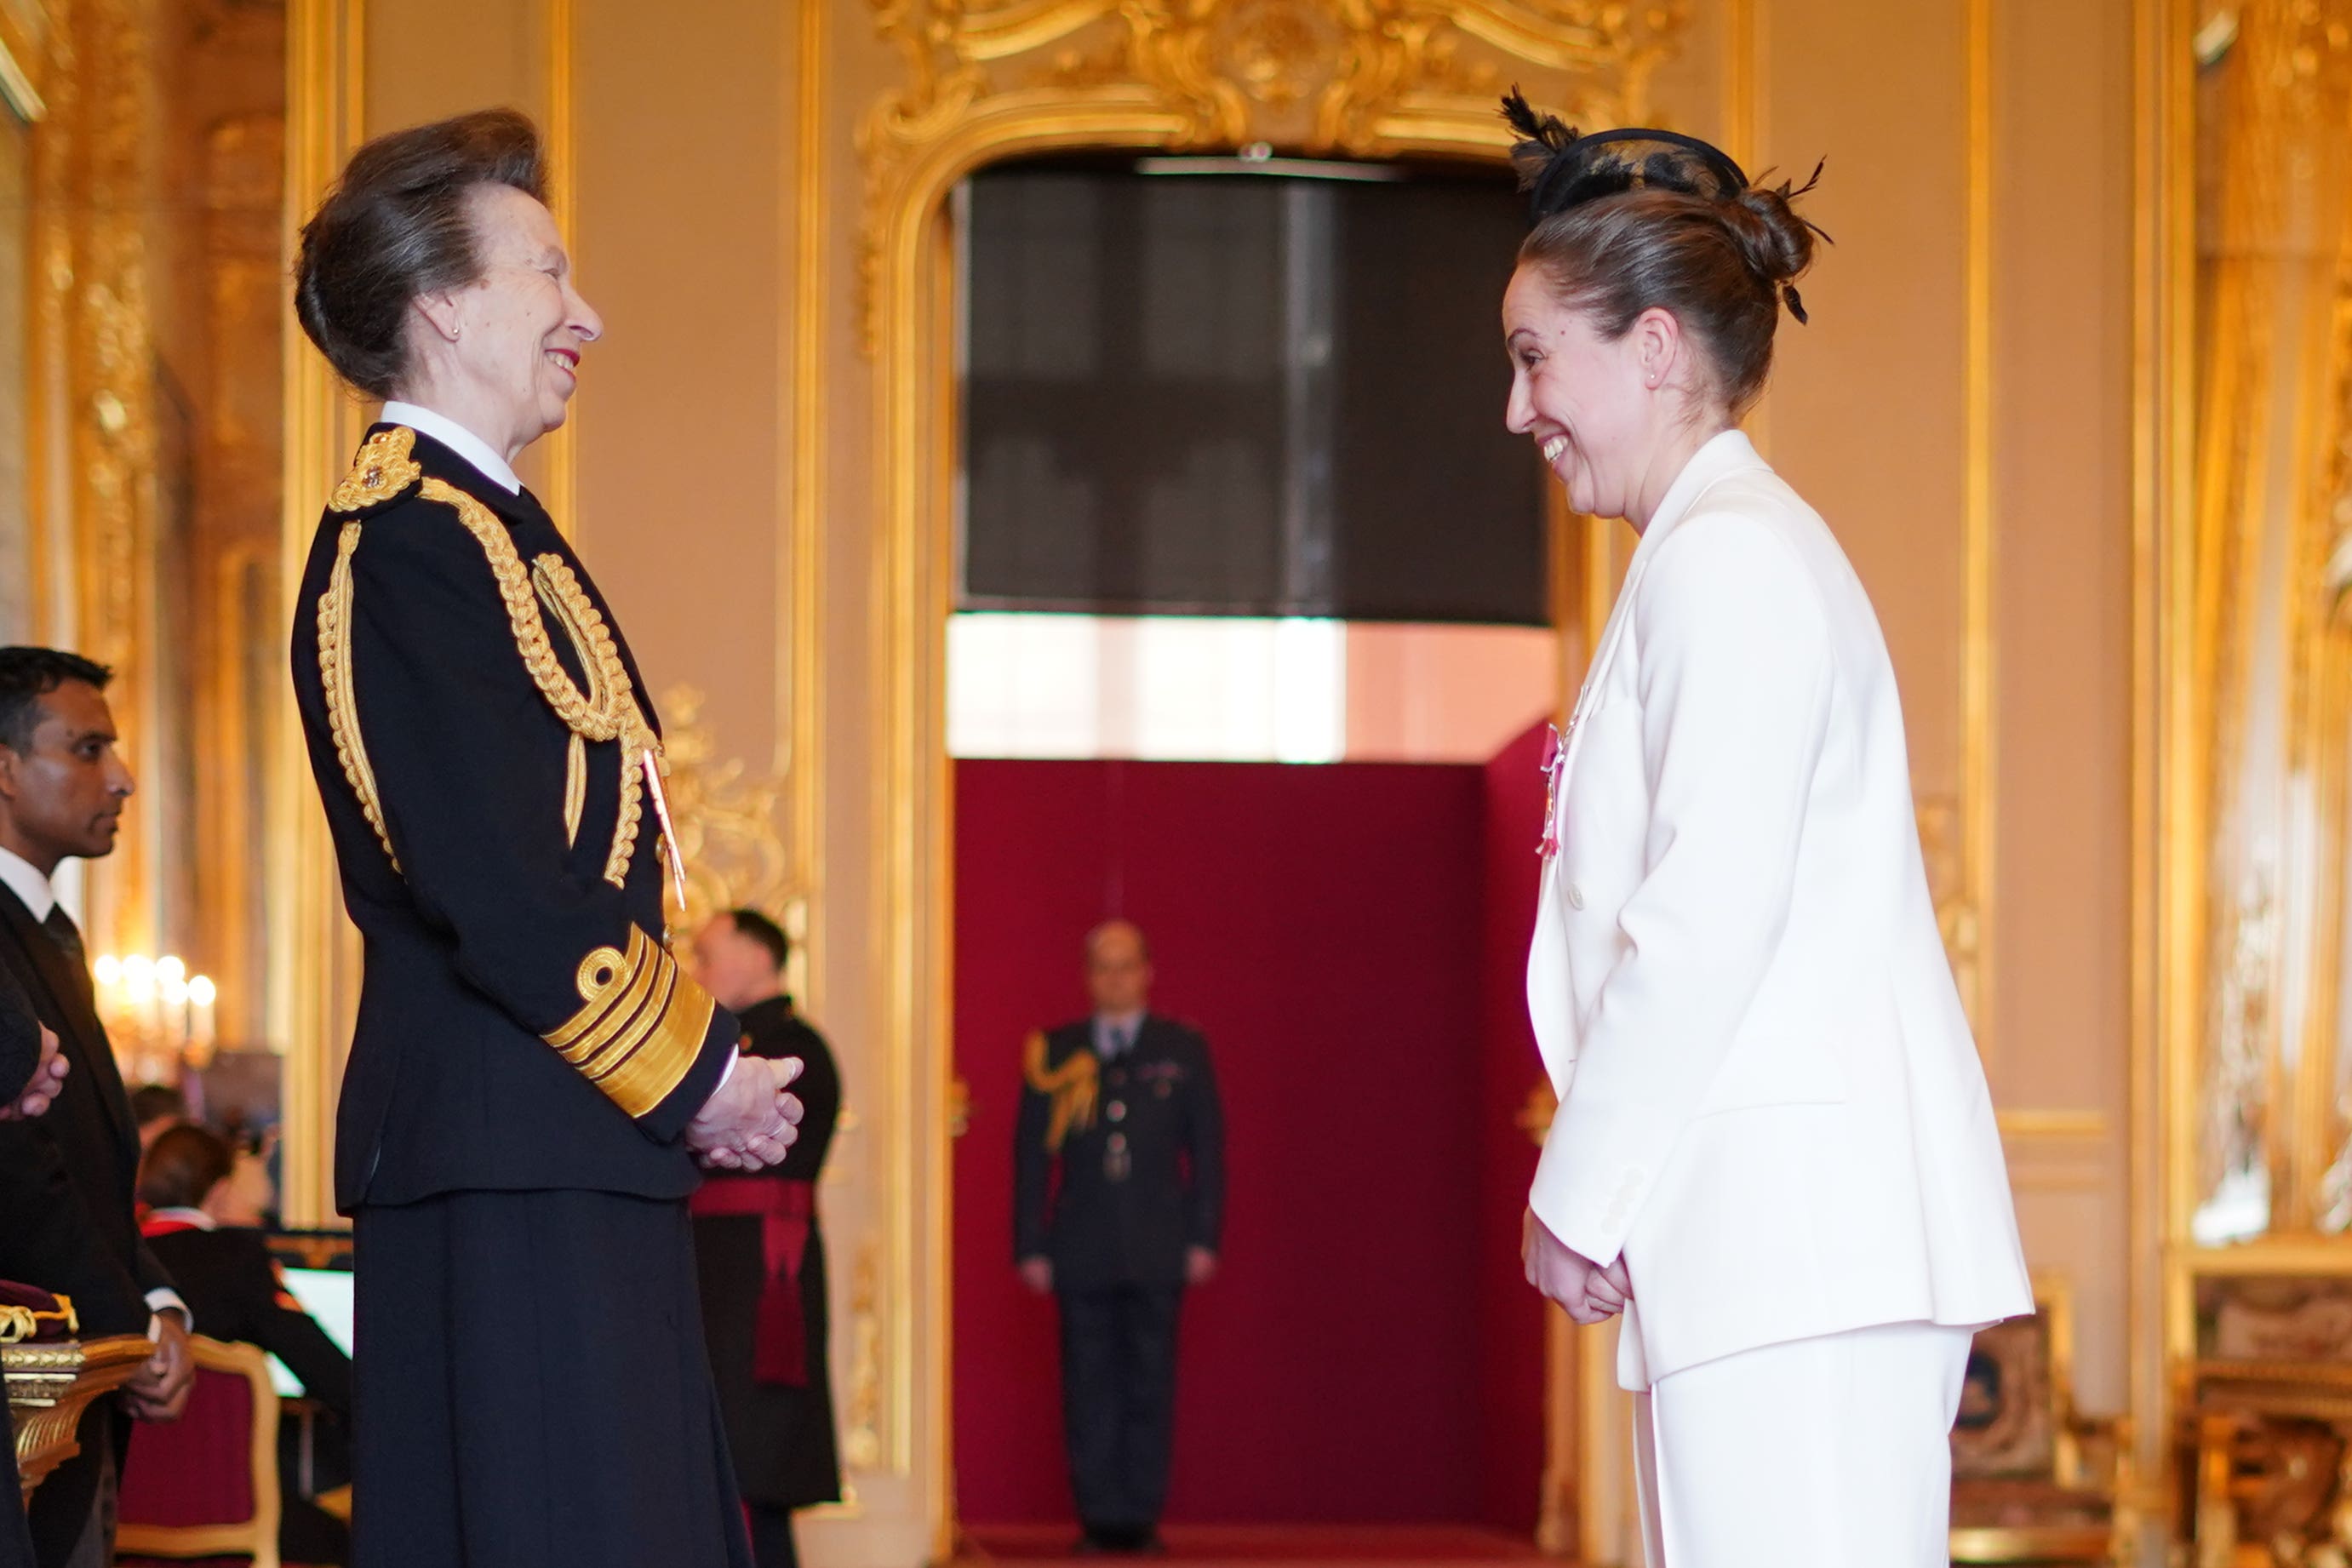 Princess Anne carried out four engagements, including an investiture, on Tuesday